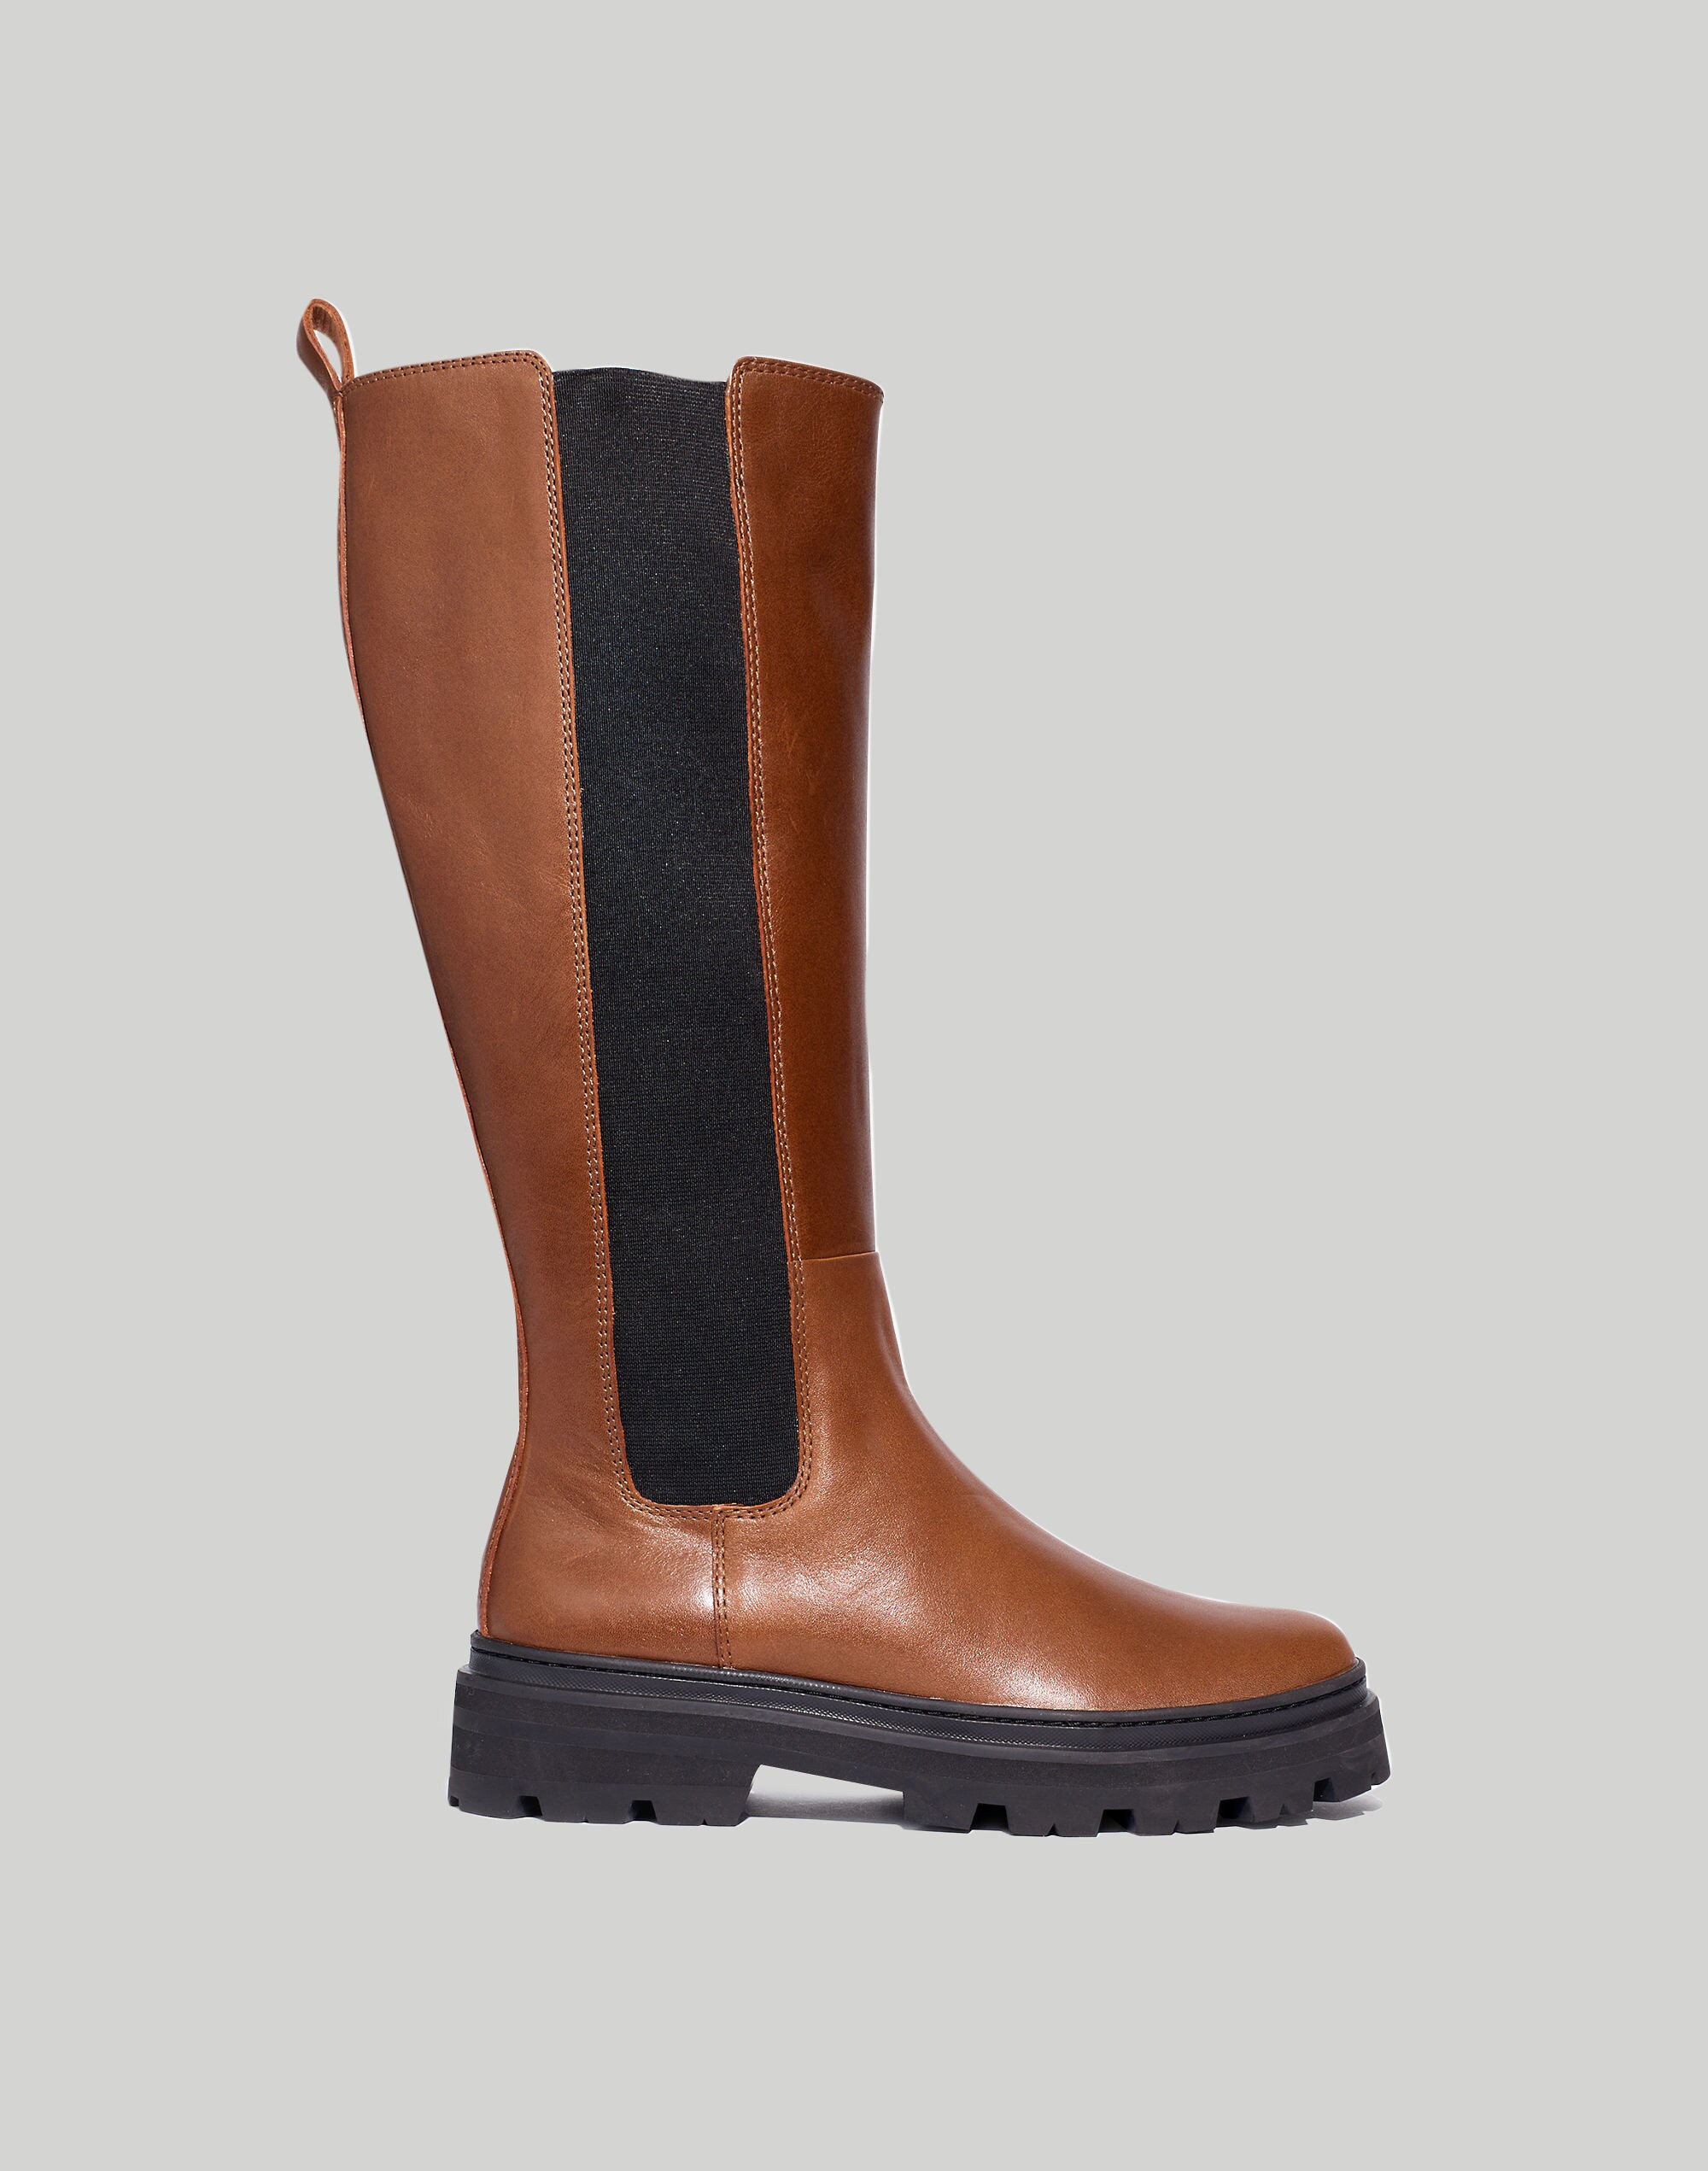 The Poppy Tall Lugsole Boot